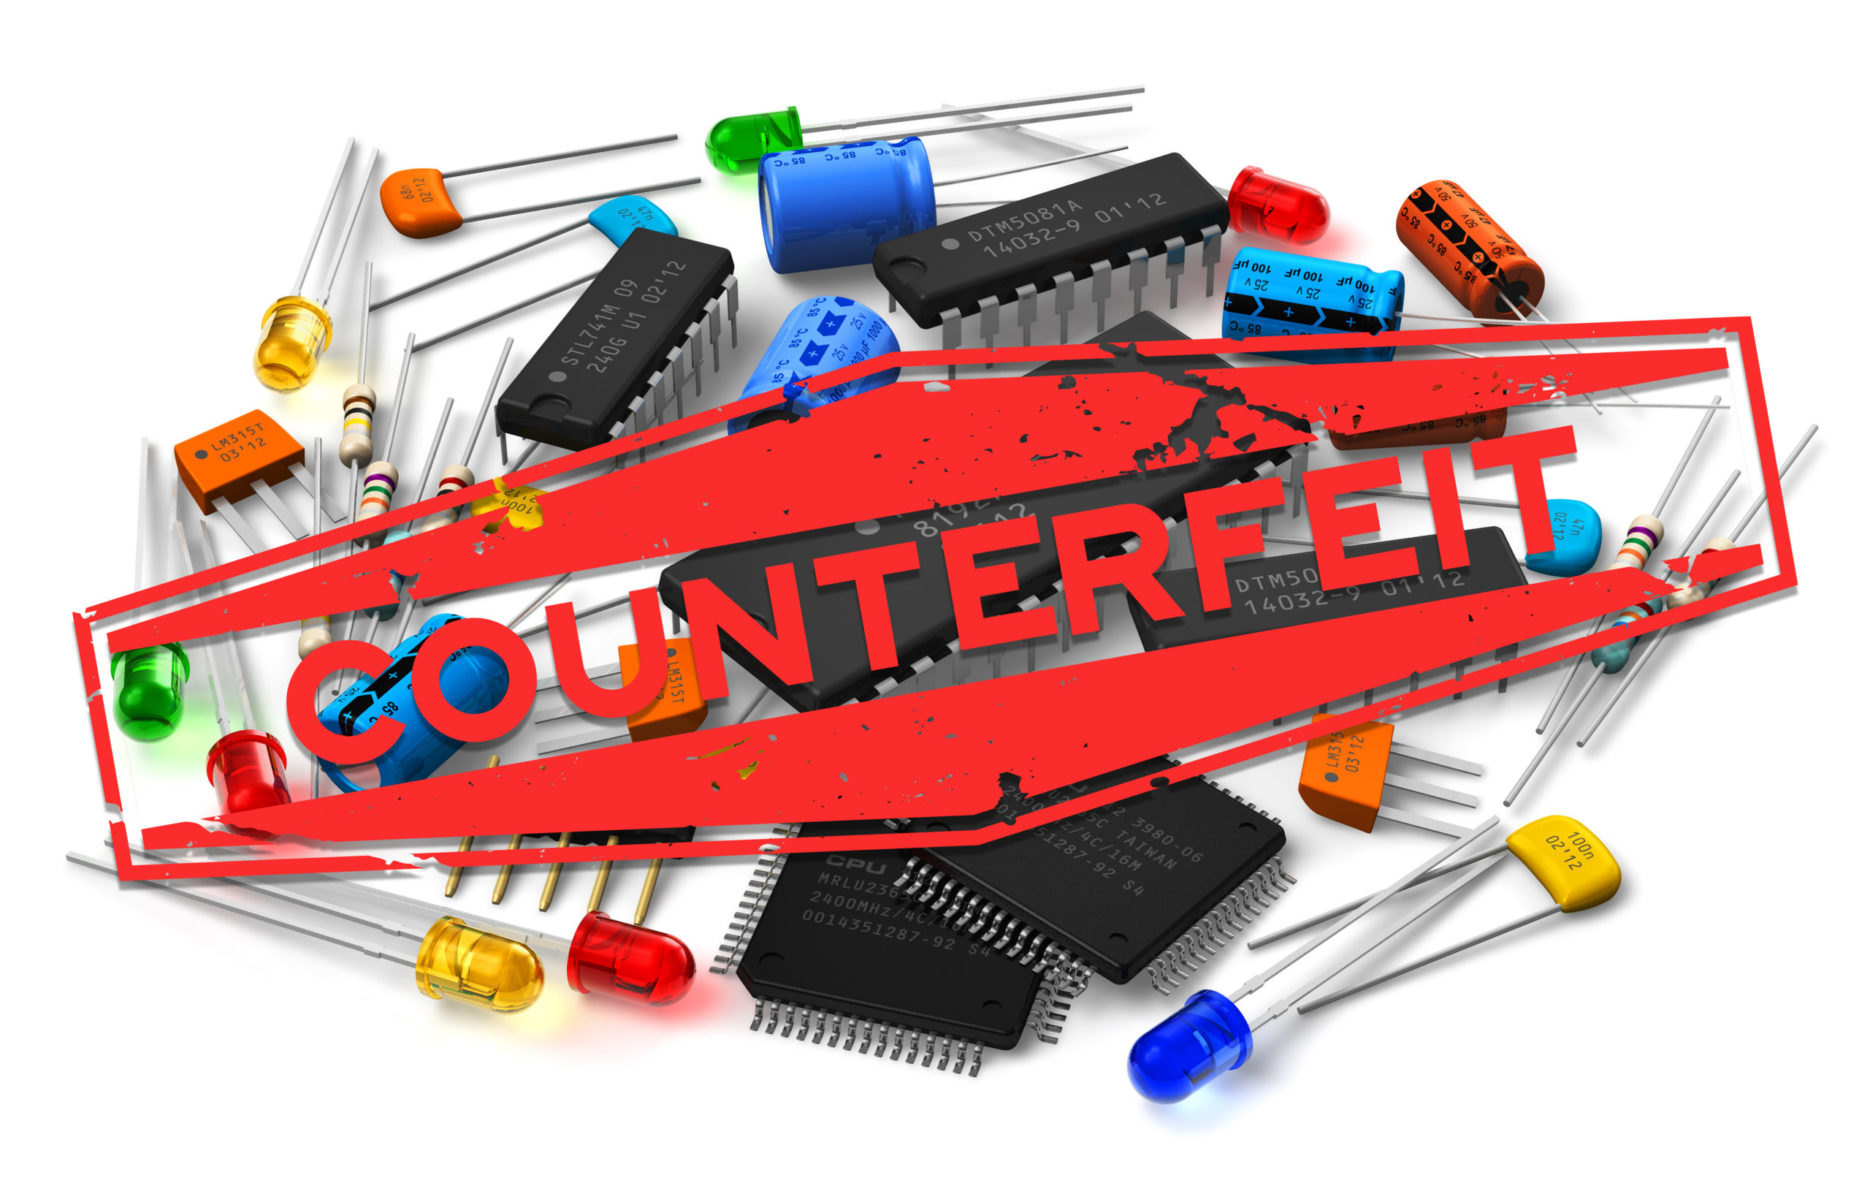 Counterfeit components traceability